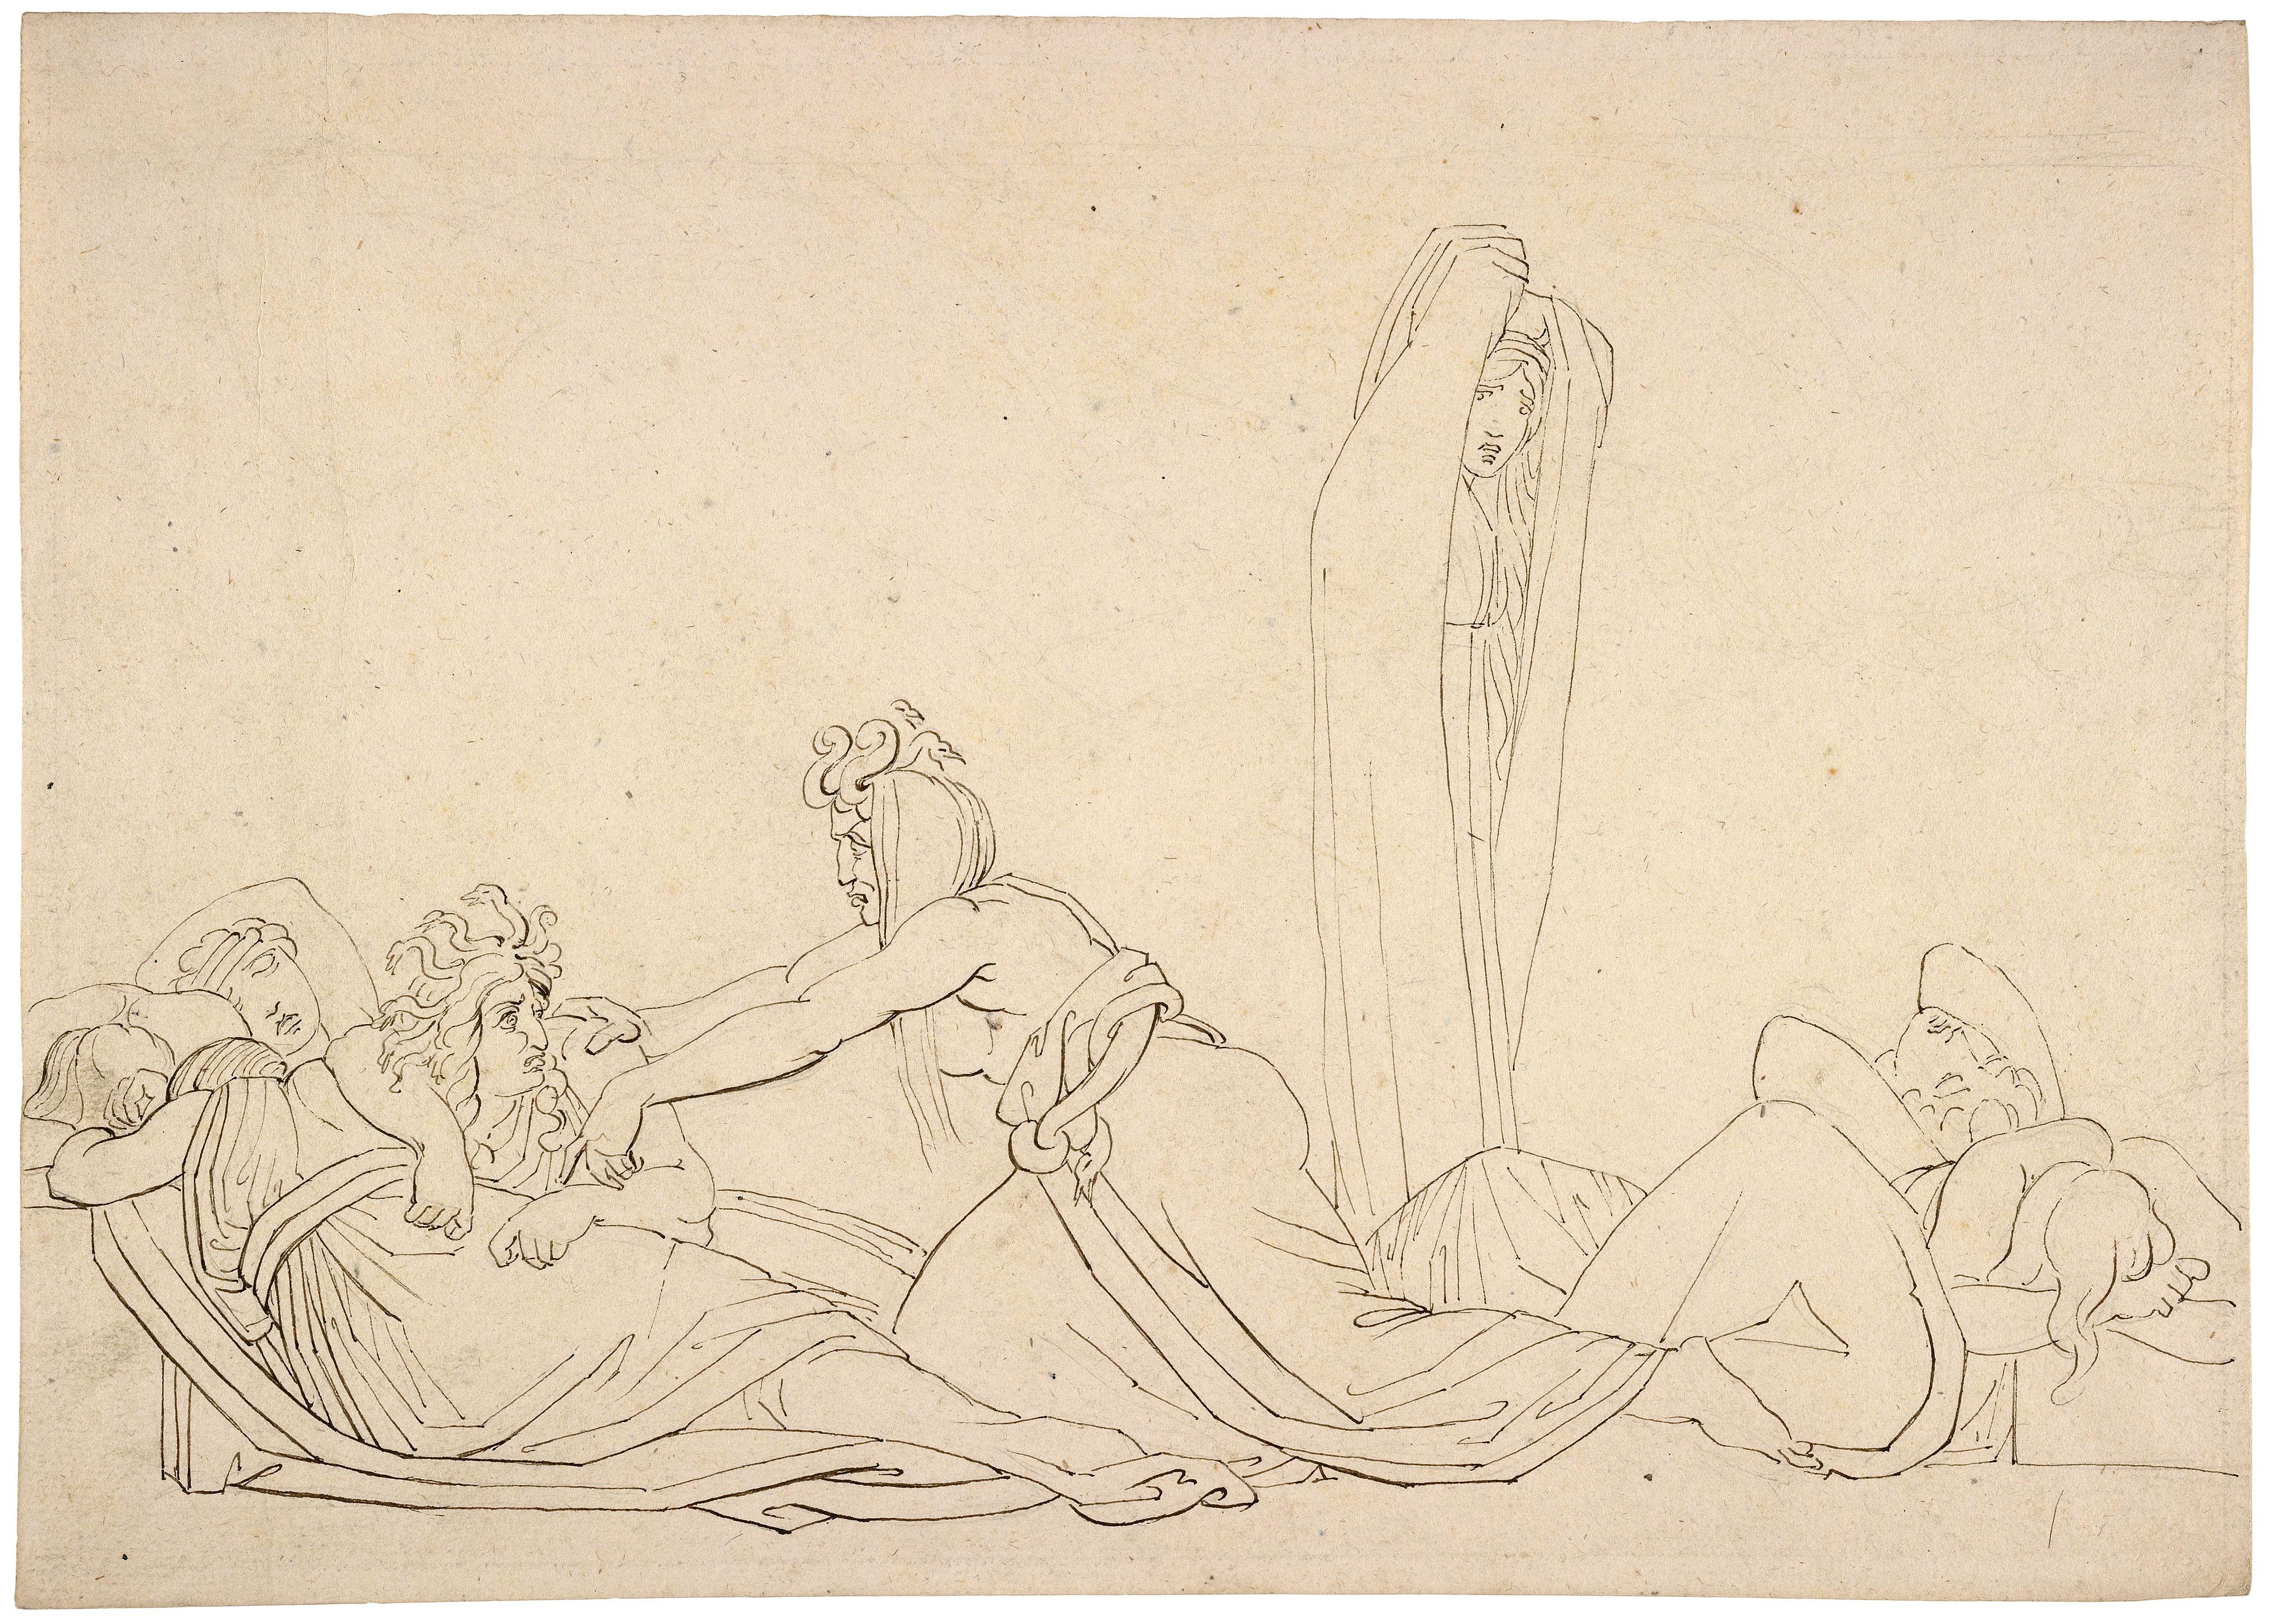 Awake, Arise, Arouse Her As I Rose thee. The Furies by John Flaxman - 1792 - 133 x 191 mm private collection